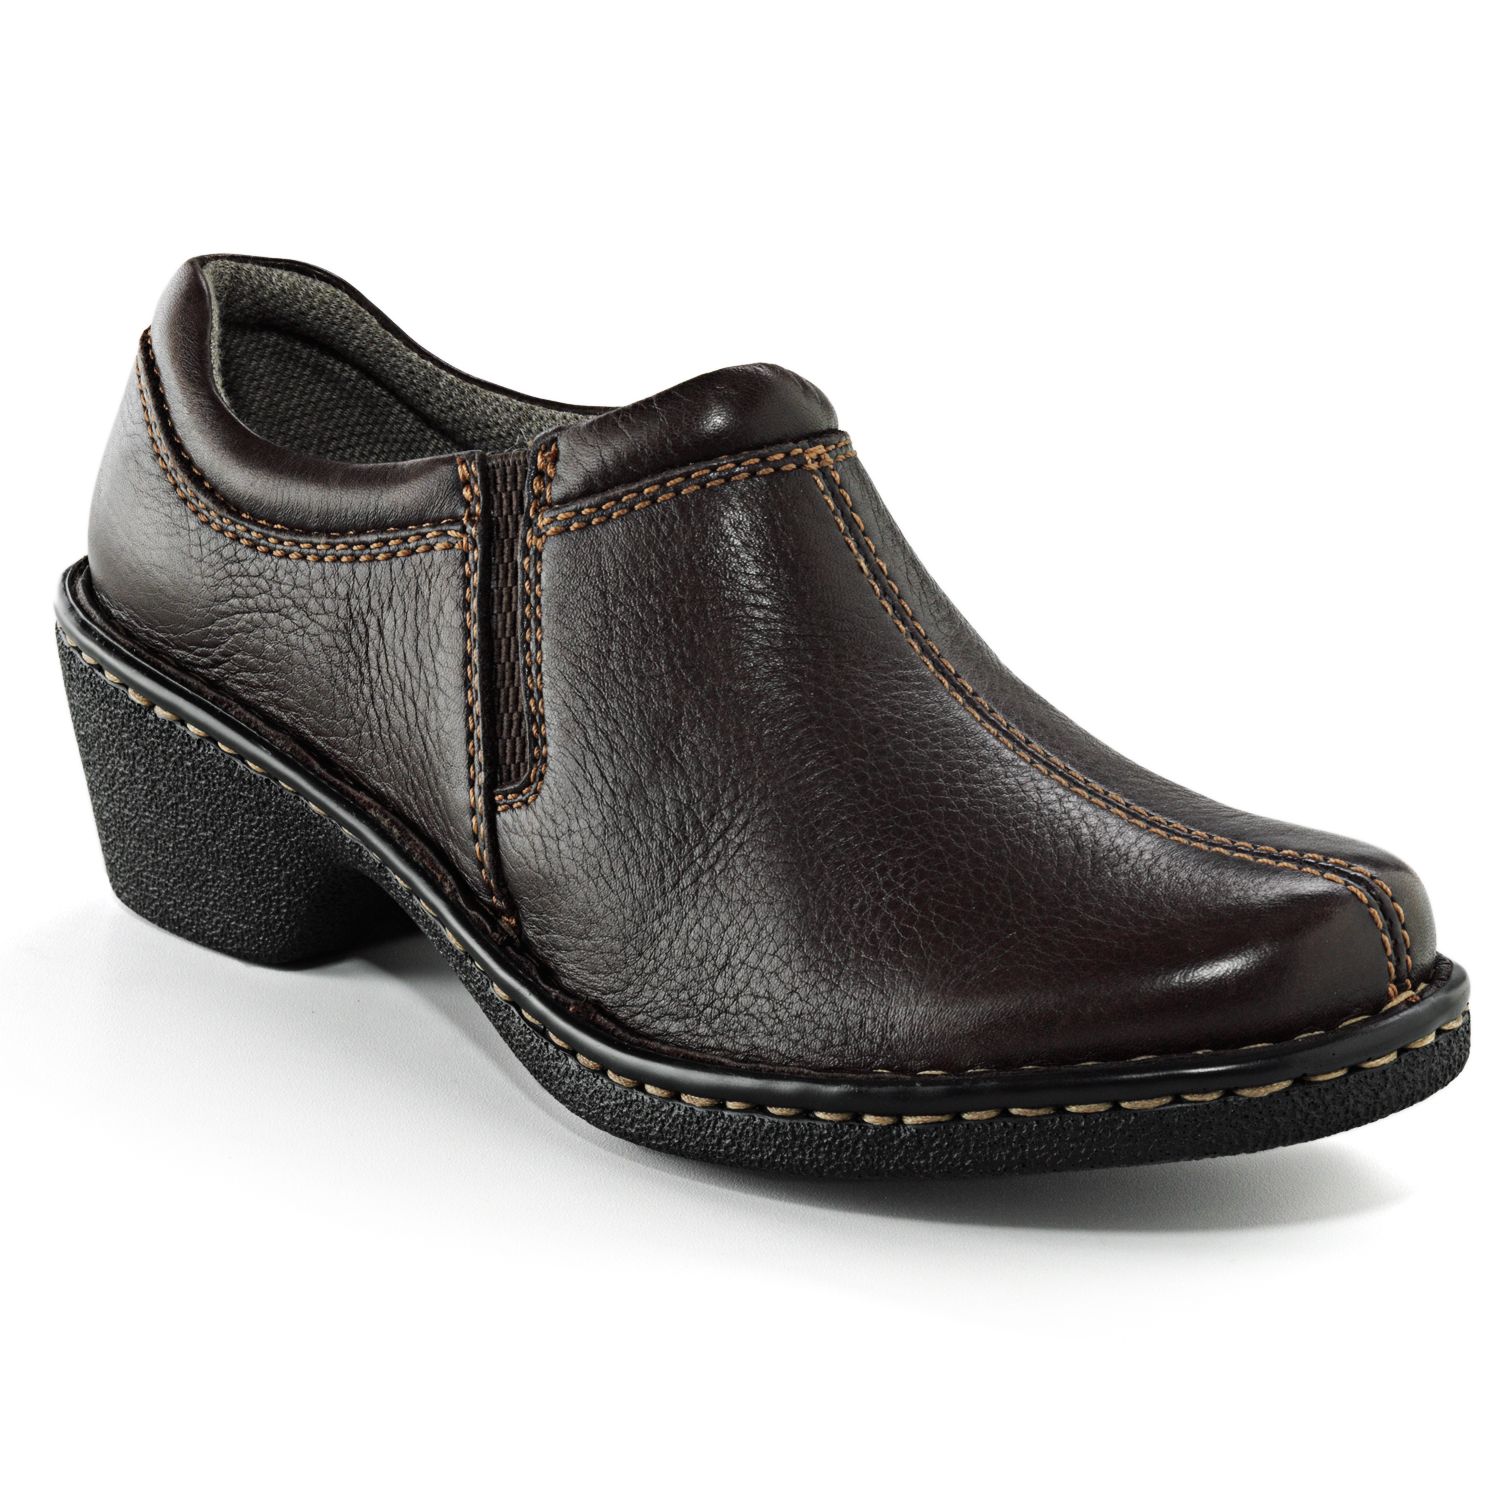 Image for Eastland Amore Women's Slip-On Shoes at Kohl's.